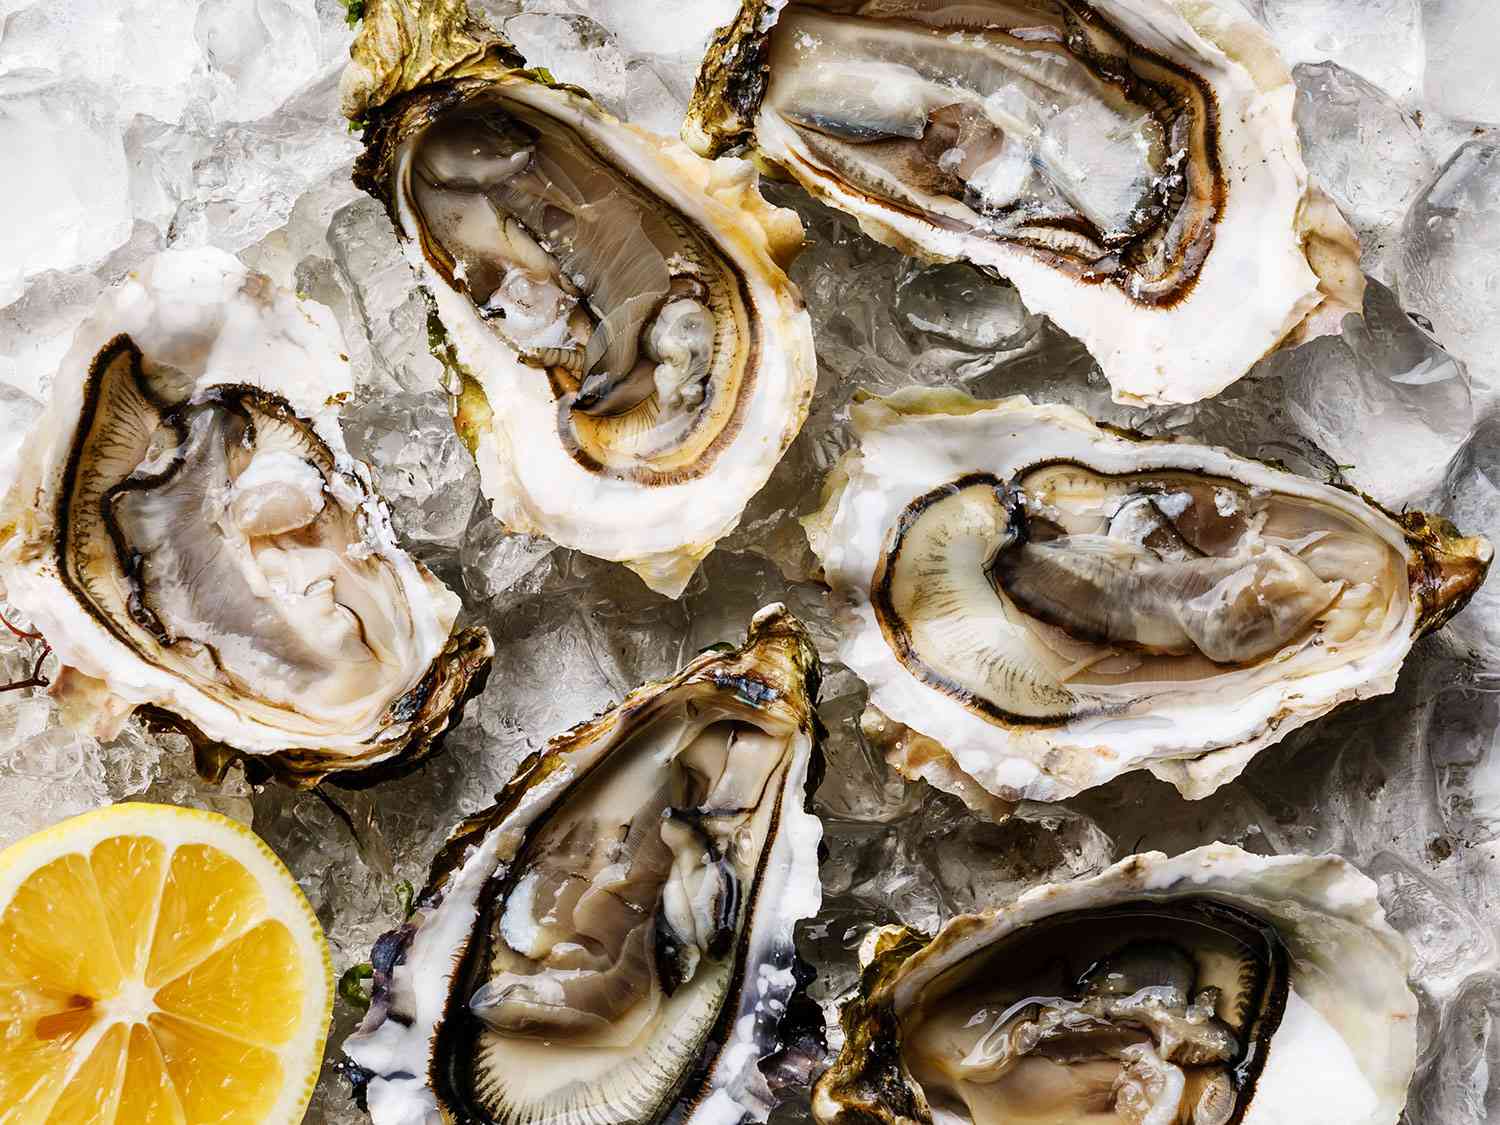 How To Store Live Oysters